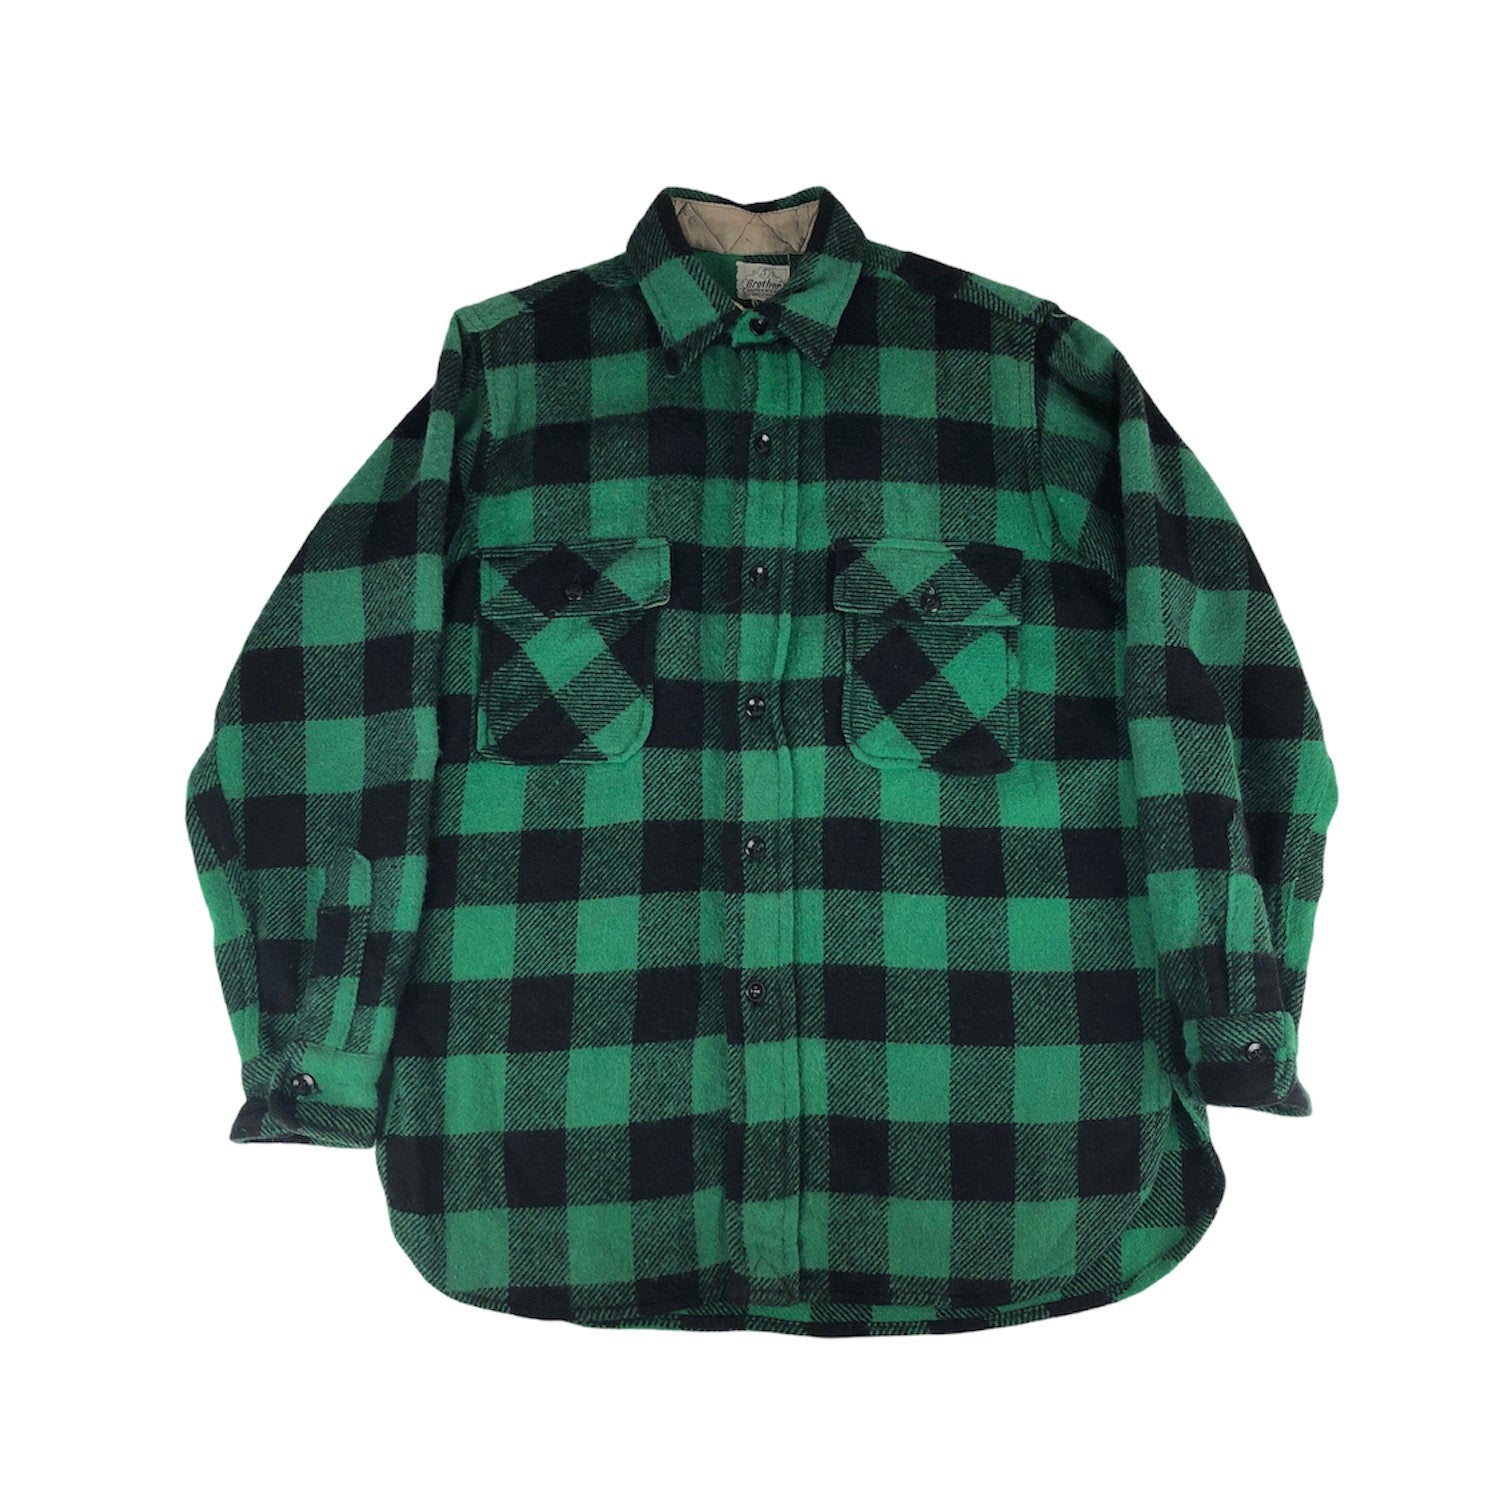 Vintage 1950s Union Made Five Brother Green Buffalo Check Plaid Wool Shirt Jacket